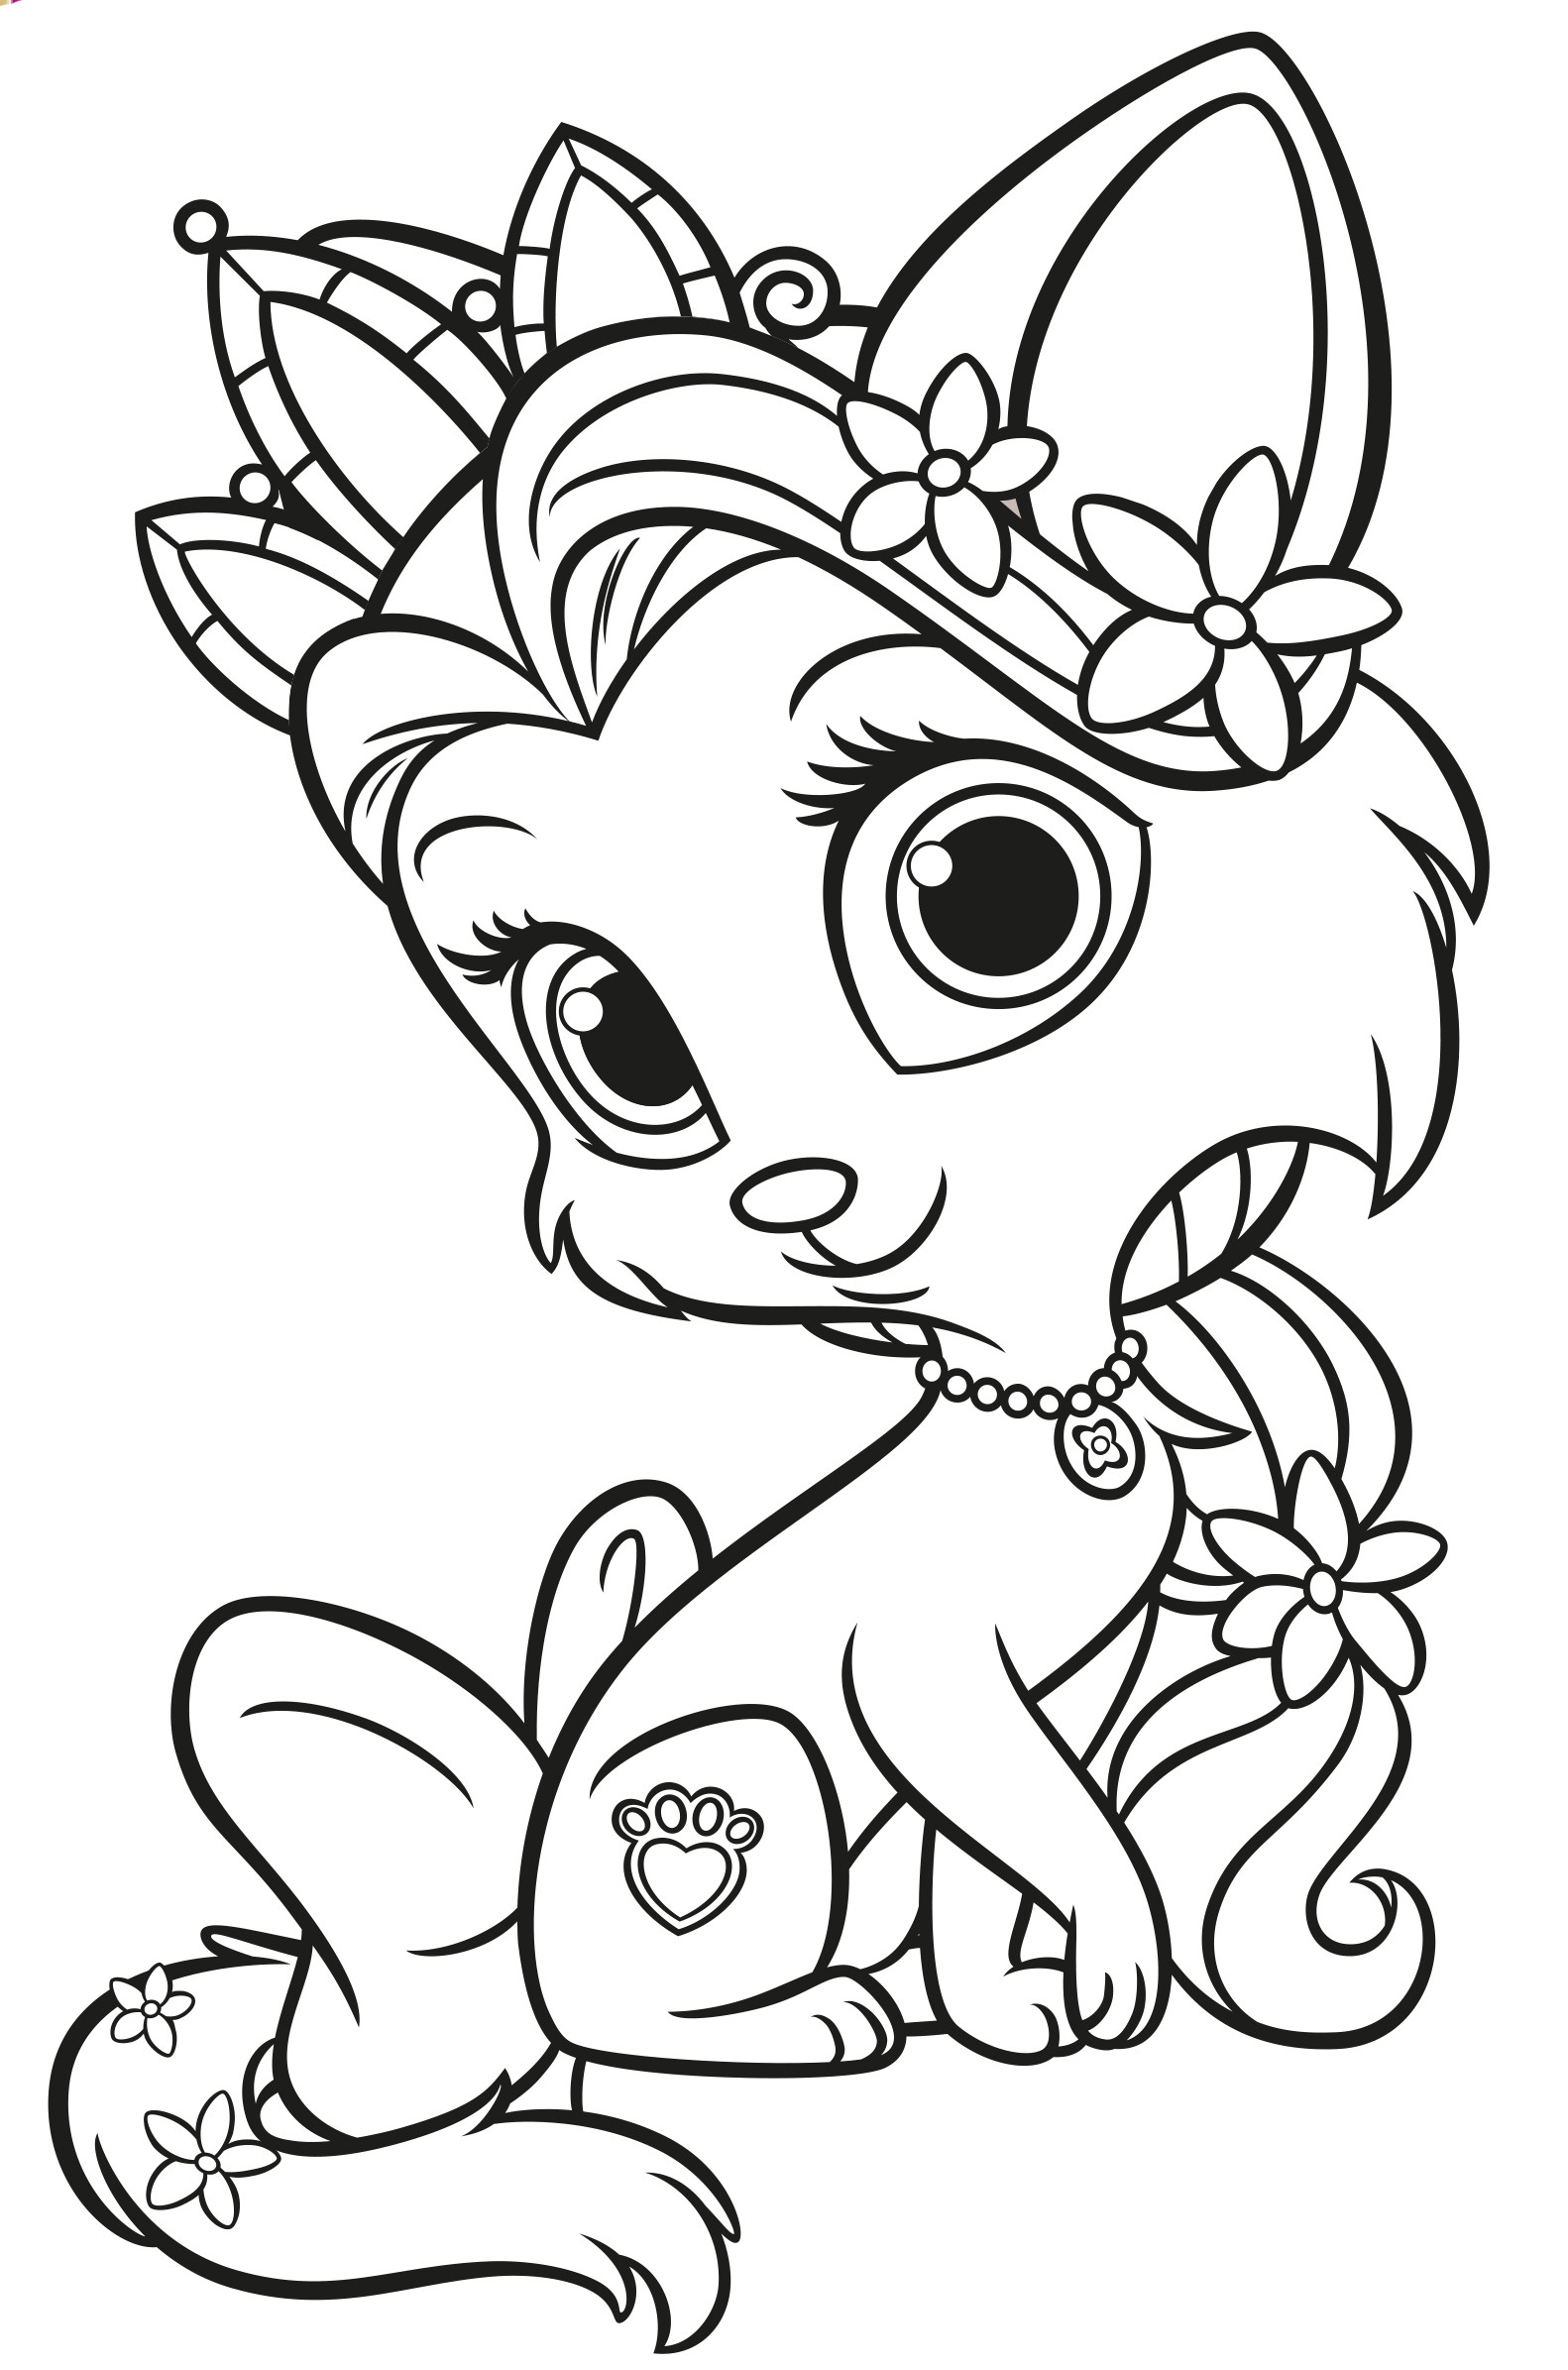 Palace Pets Coloring Sheets For Girls
 Disney Princesss Palace Pets Free Coloring Pages